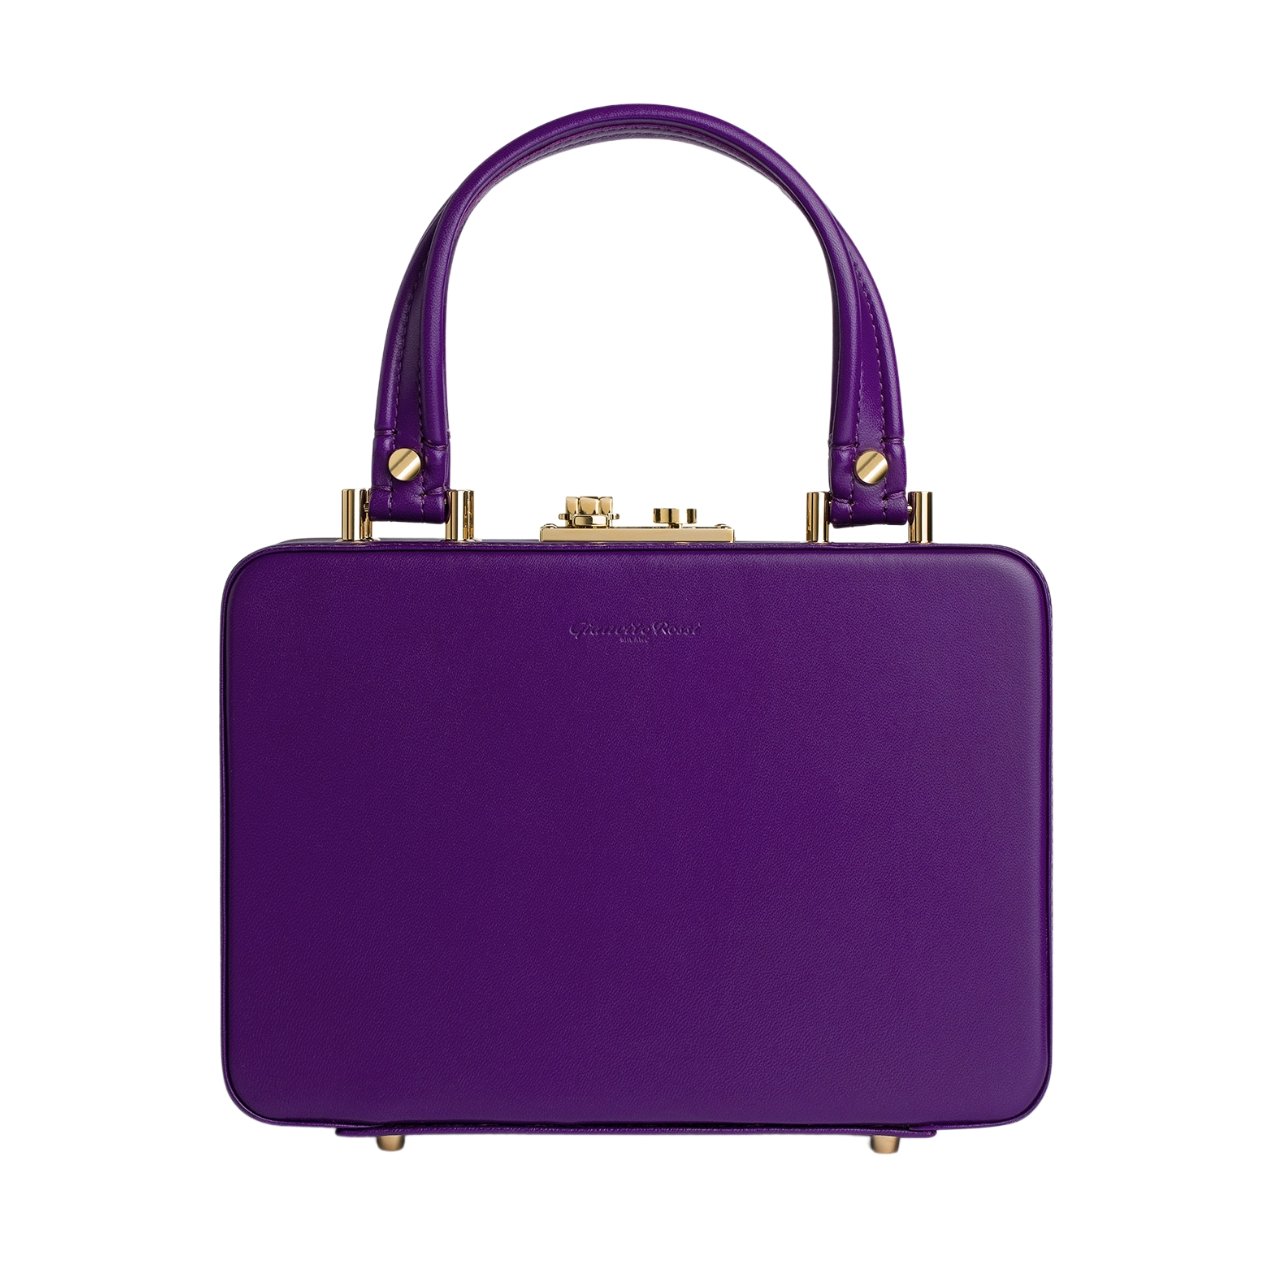 Gianvito Rossi’s leather box top-handle Valì bag in violet